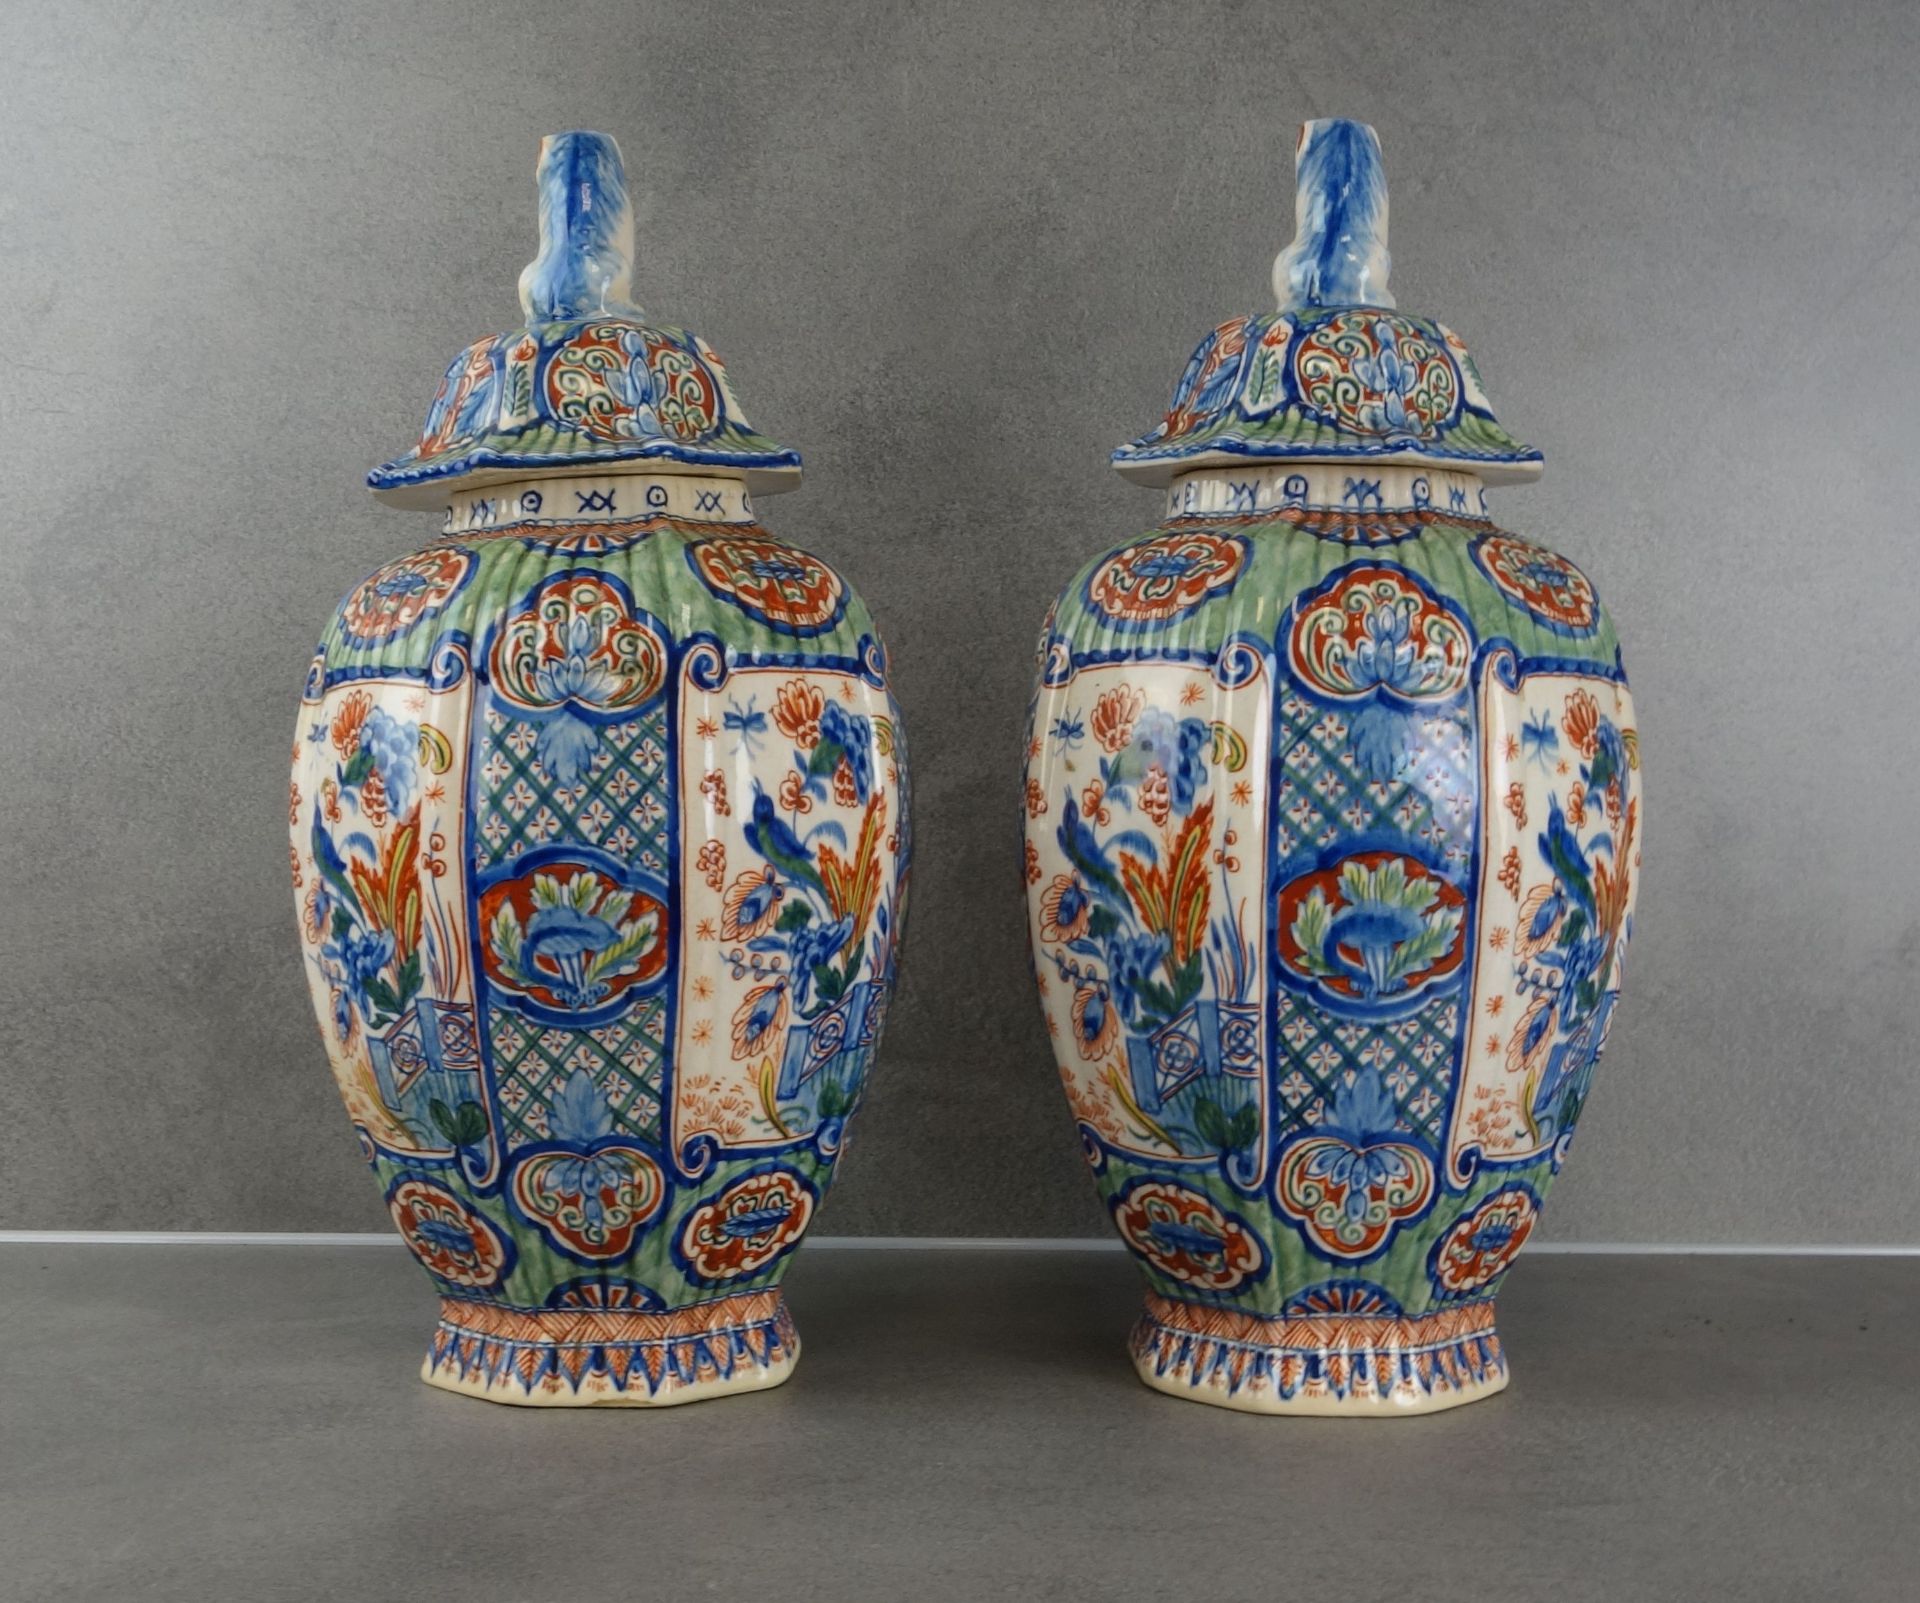 PAIR OF LID VASES WITH FOHUND HANDLES - Image 4 of 6